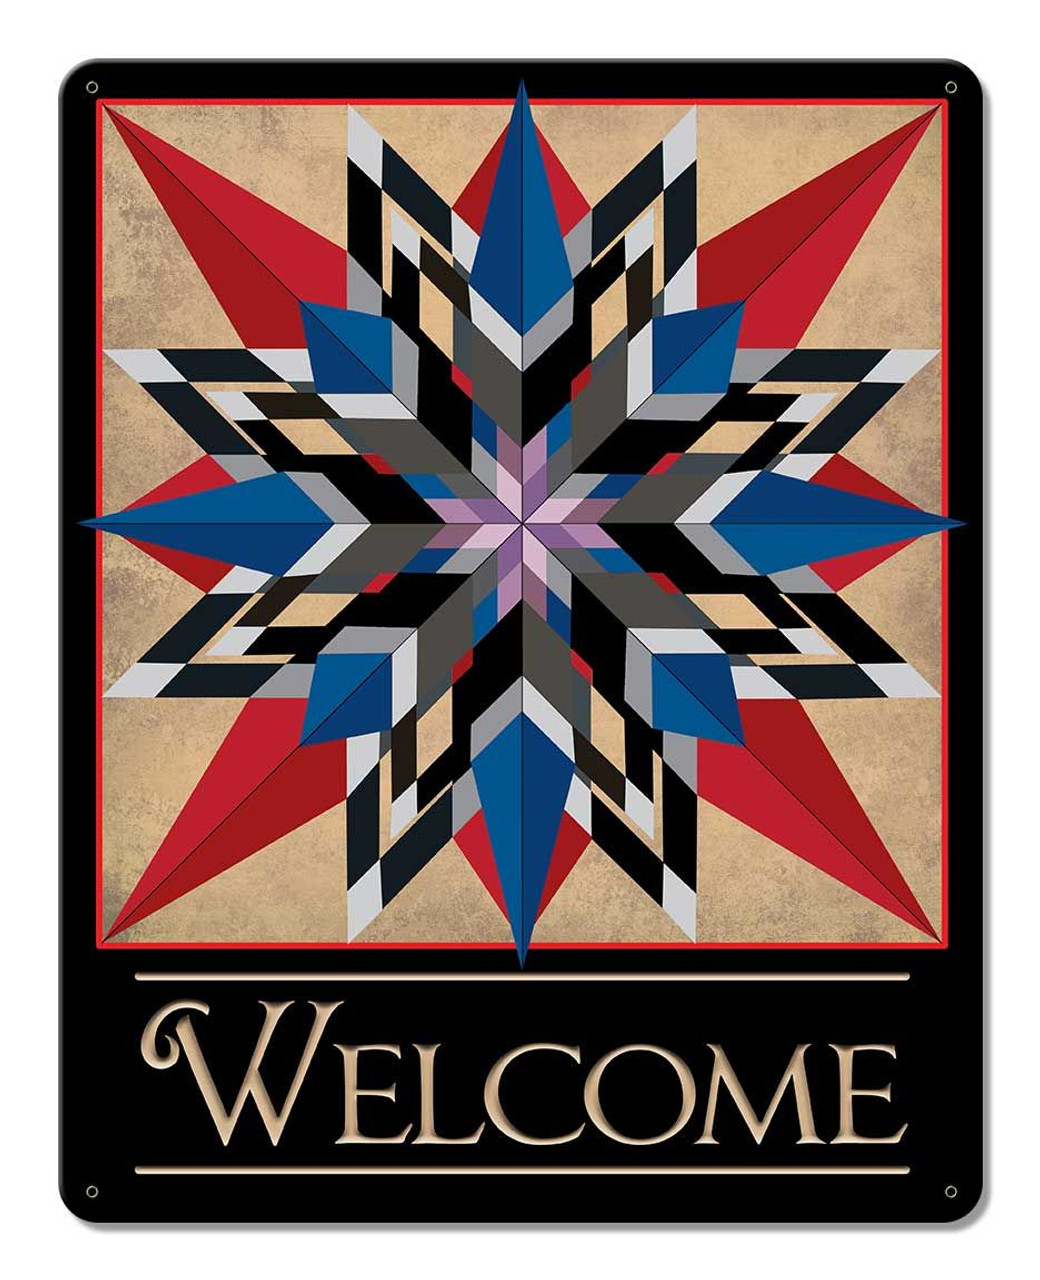 Double 16 Point Star Welcome Metal Sign 12 x 15 Inches